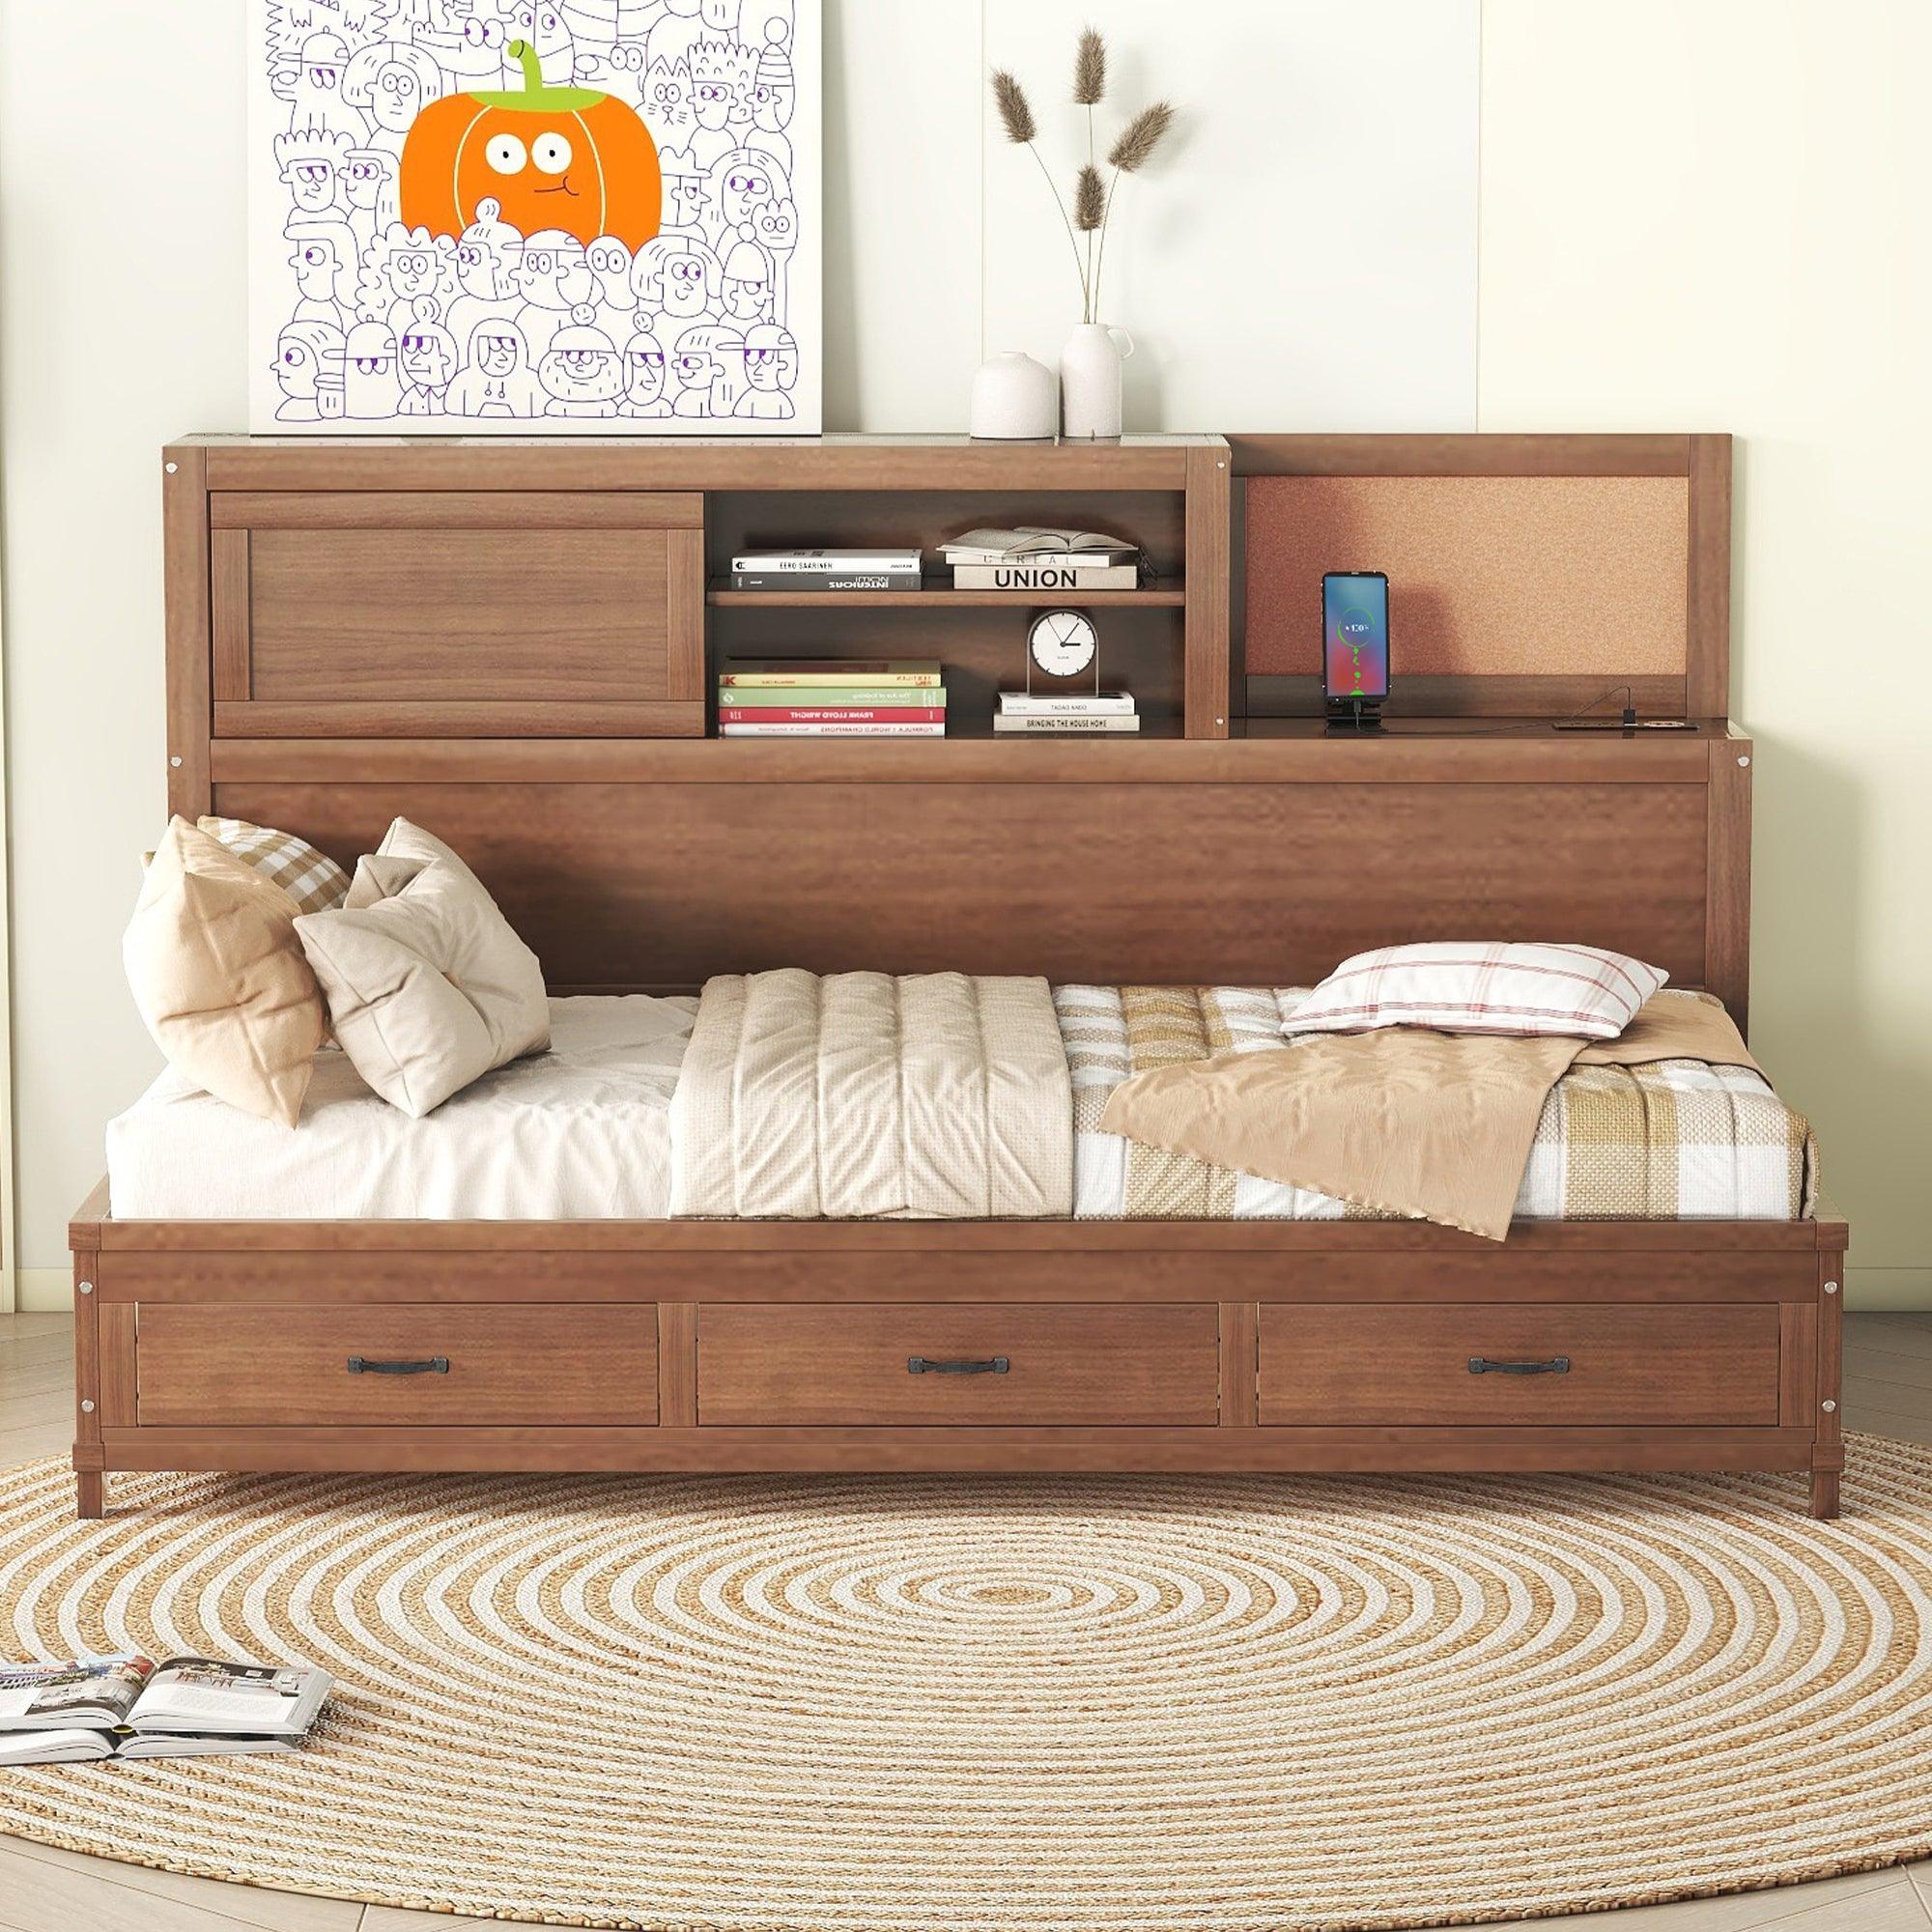 🆓🚛 Twin Size Wooden Daybed With 3 Storage Drawers, Upper Soft Board, Shelf, Set Of Sockets & Usb Ports, Brown